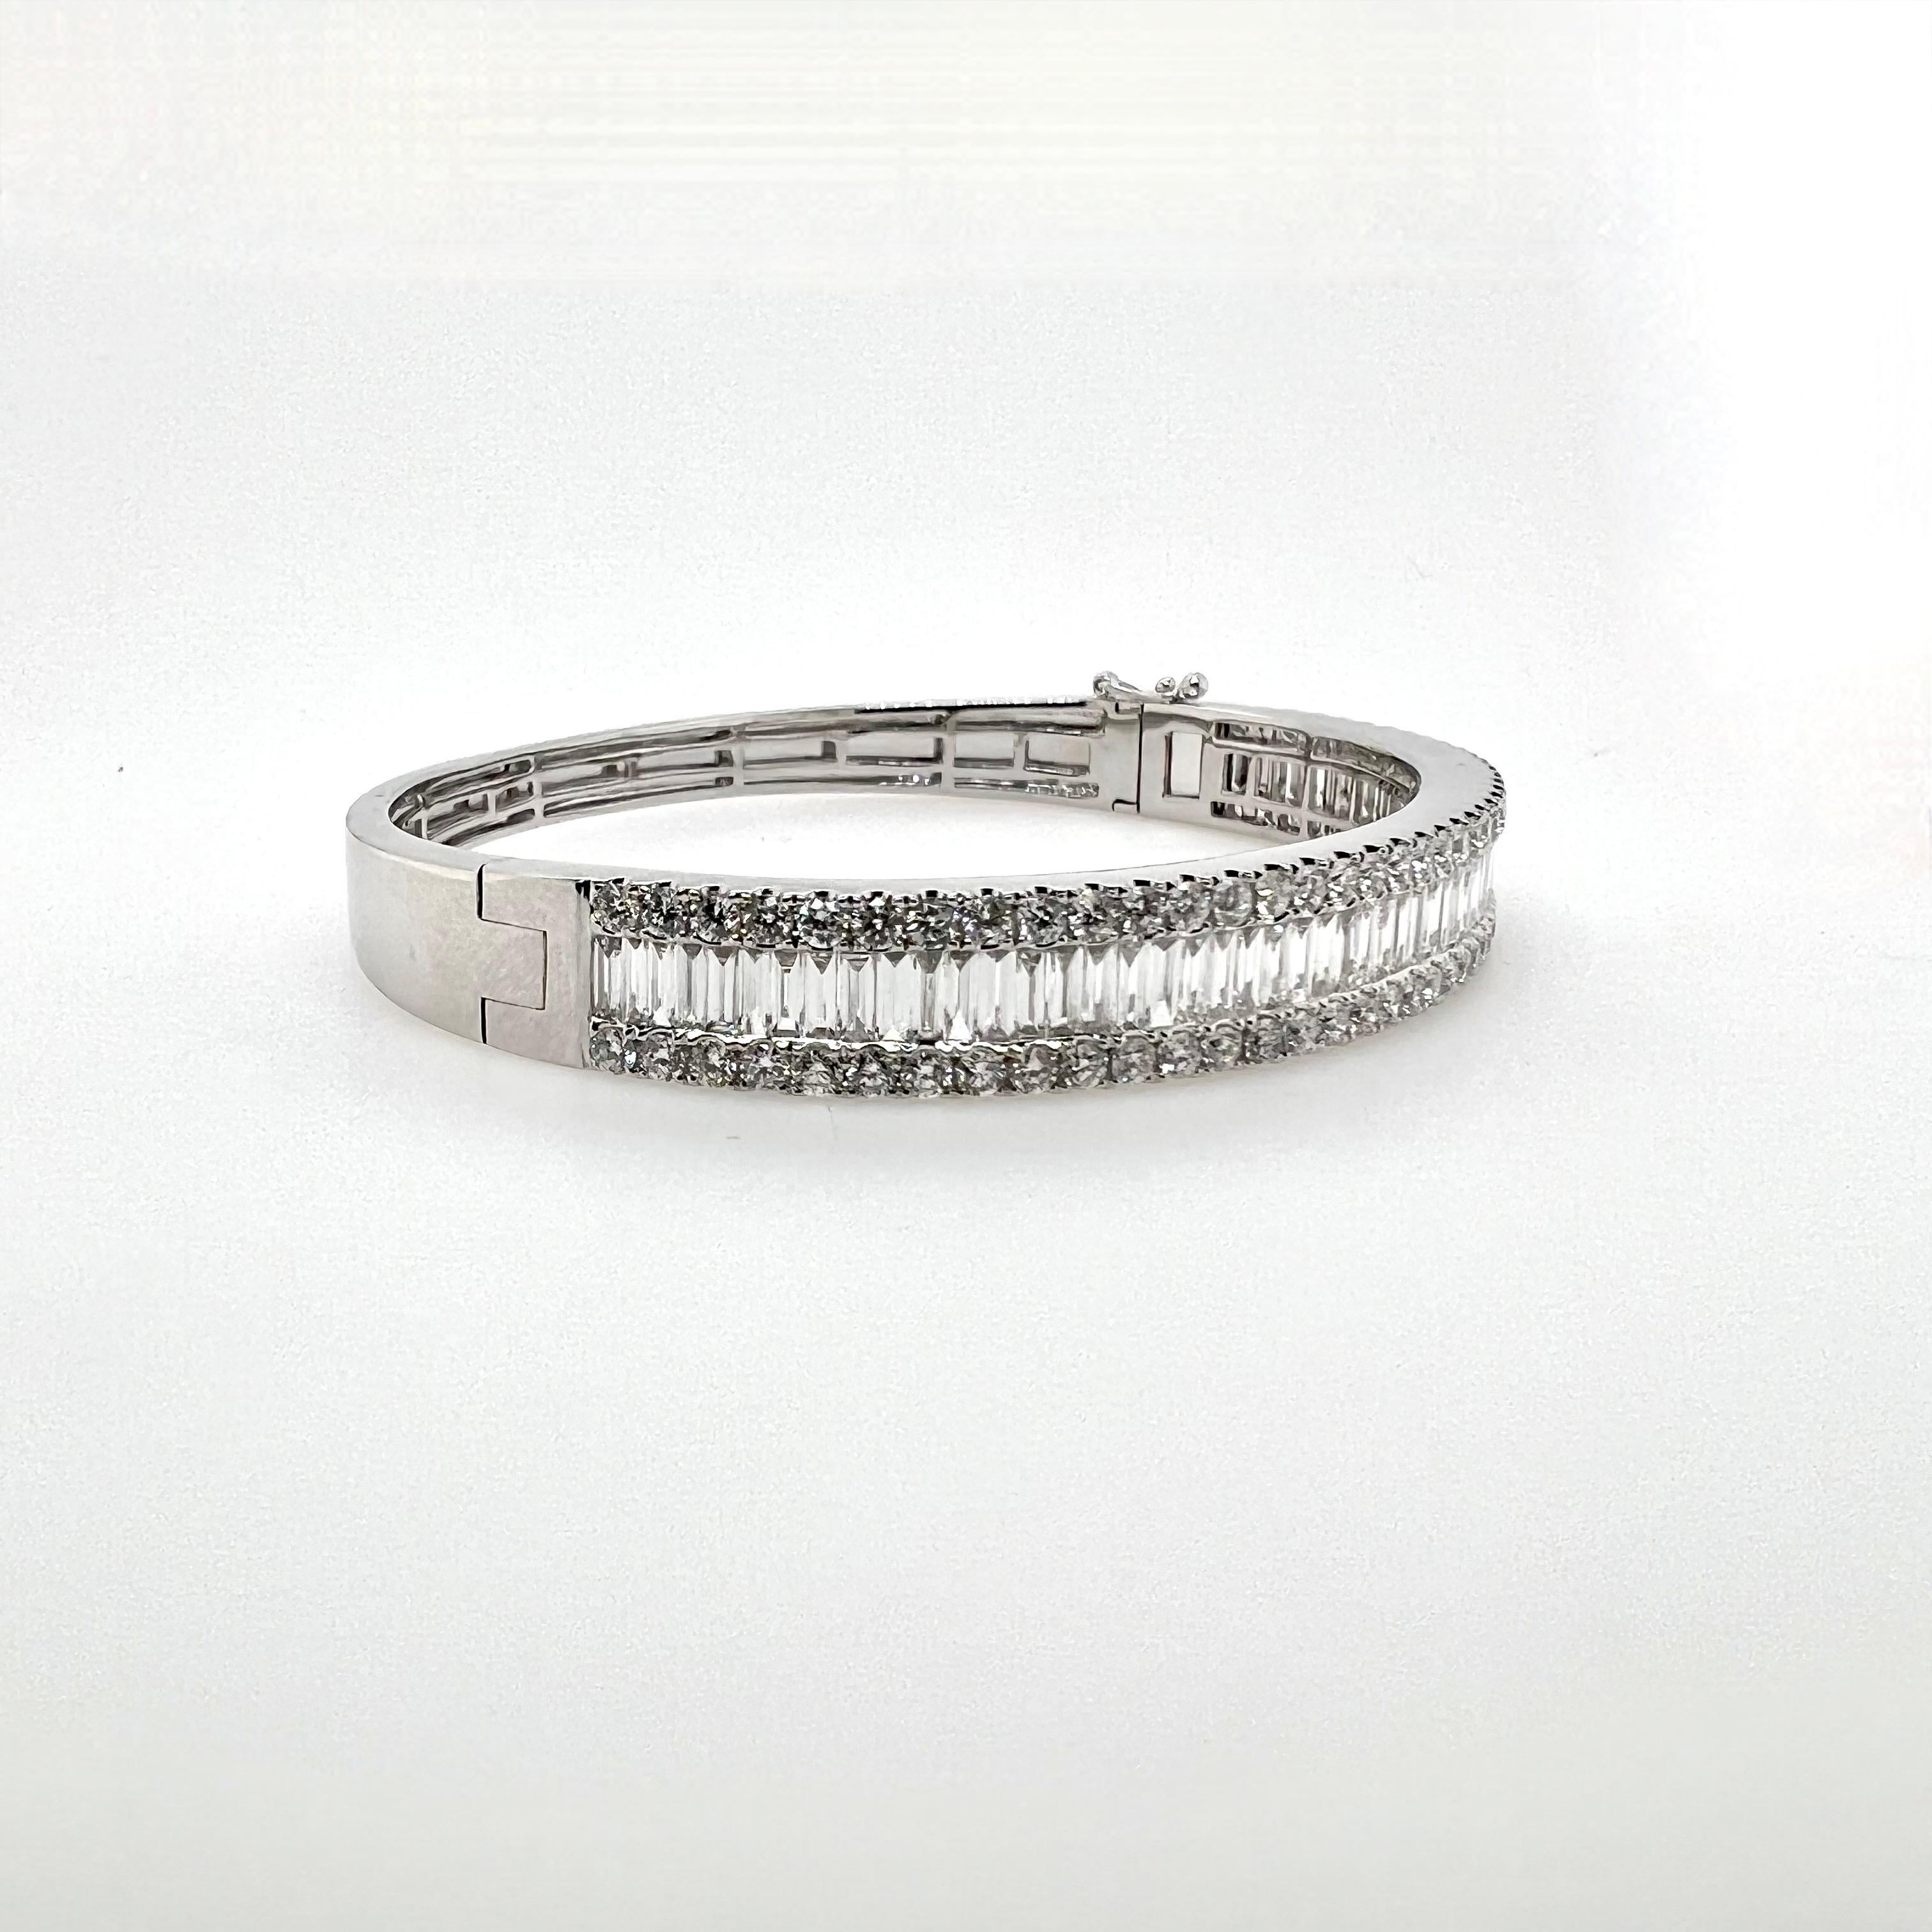 This gorgeous 18k white gold diamond bangle has beautiful baguette diamonds channeled set while the shoulders have round brilliant diamonds prong set.  At a little over 1/4'' in width, the bangle can be stacked with other items or can be worn solo